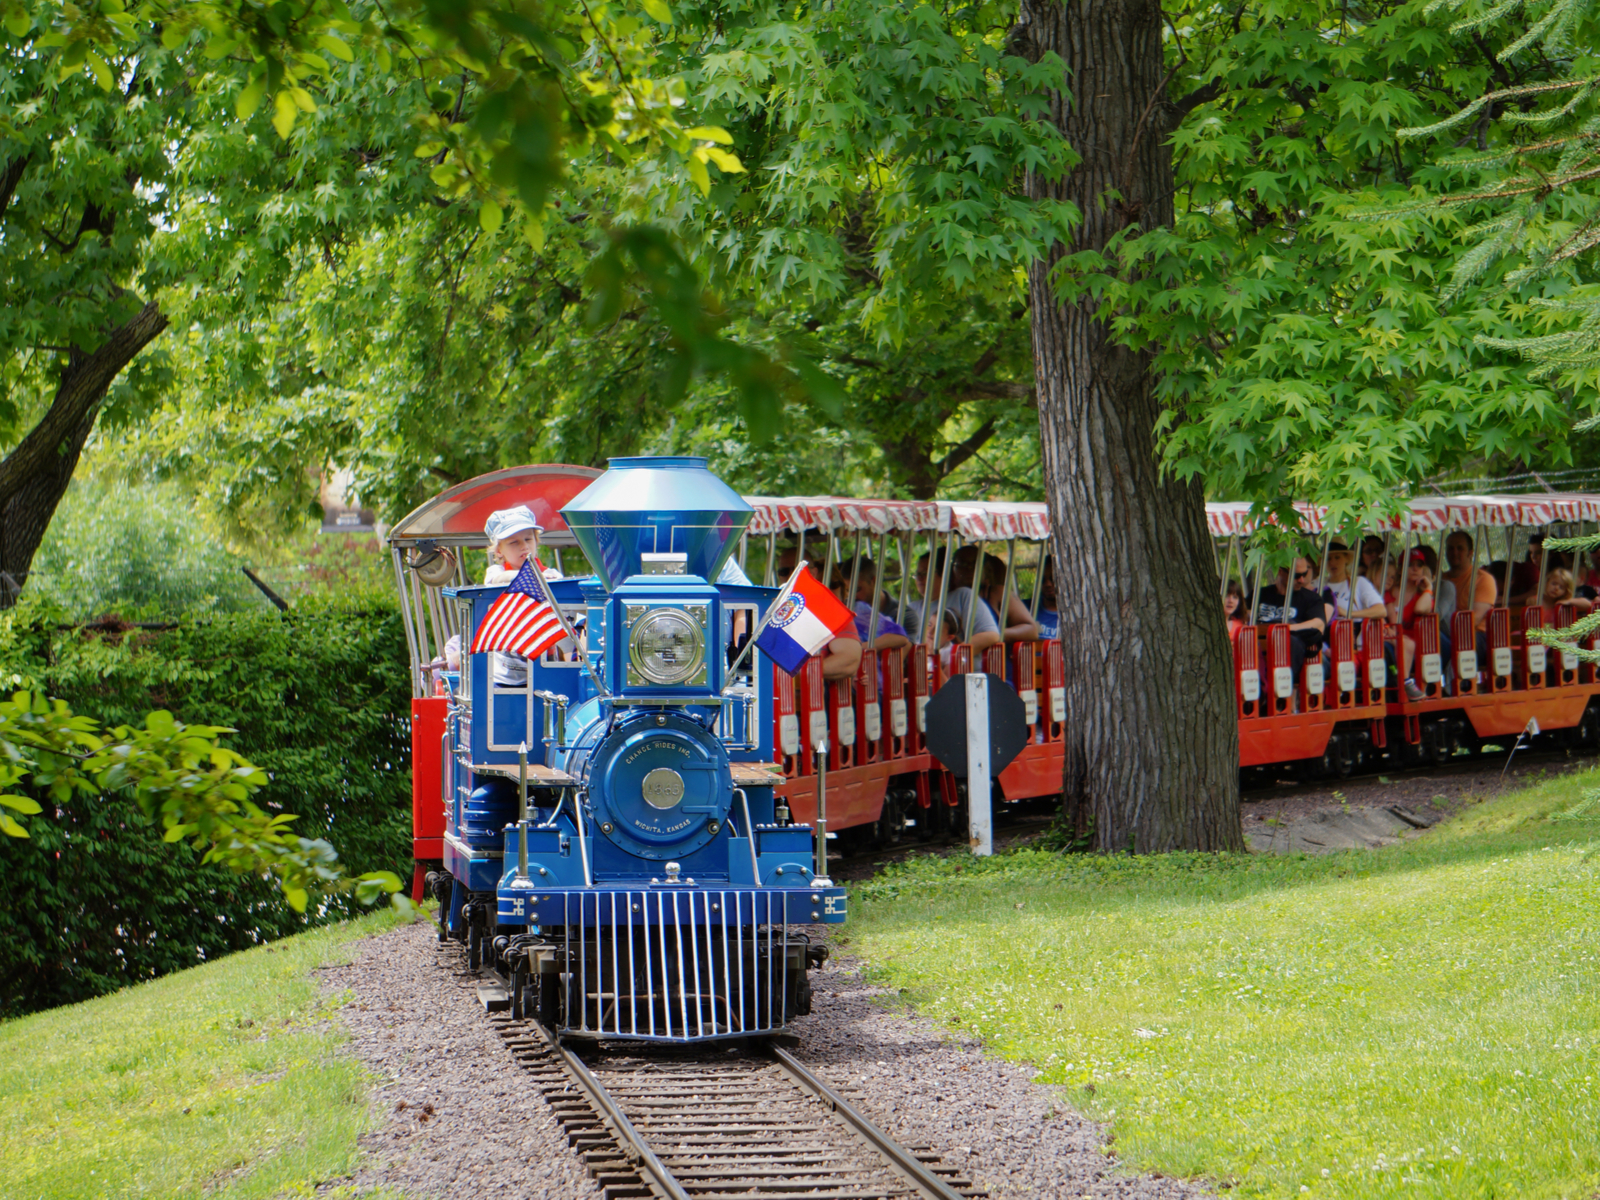 Train at the zoo, one of the best things to do in St. Louis